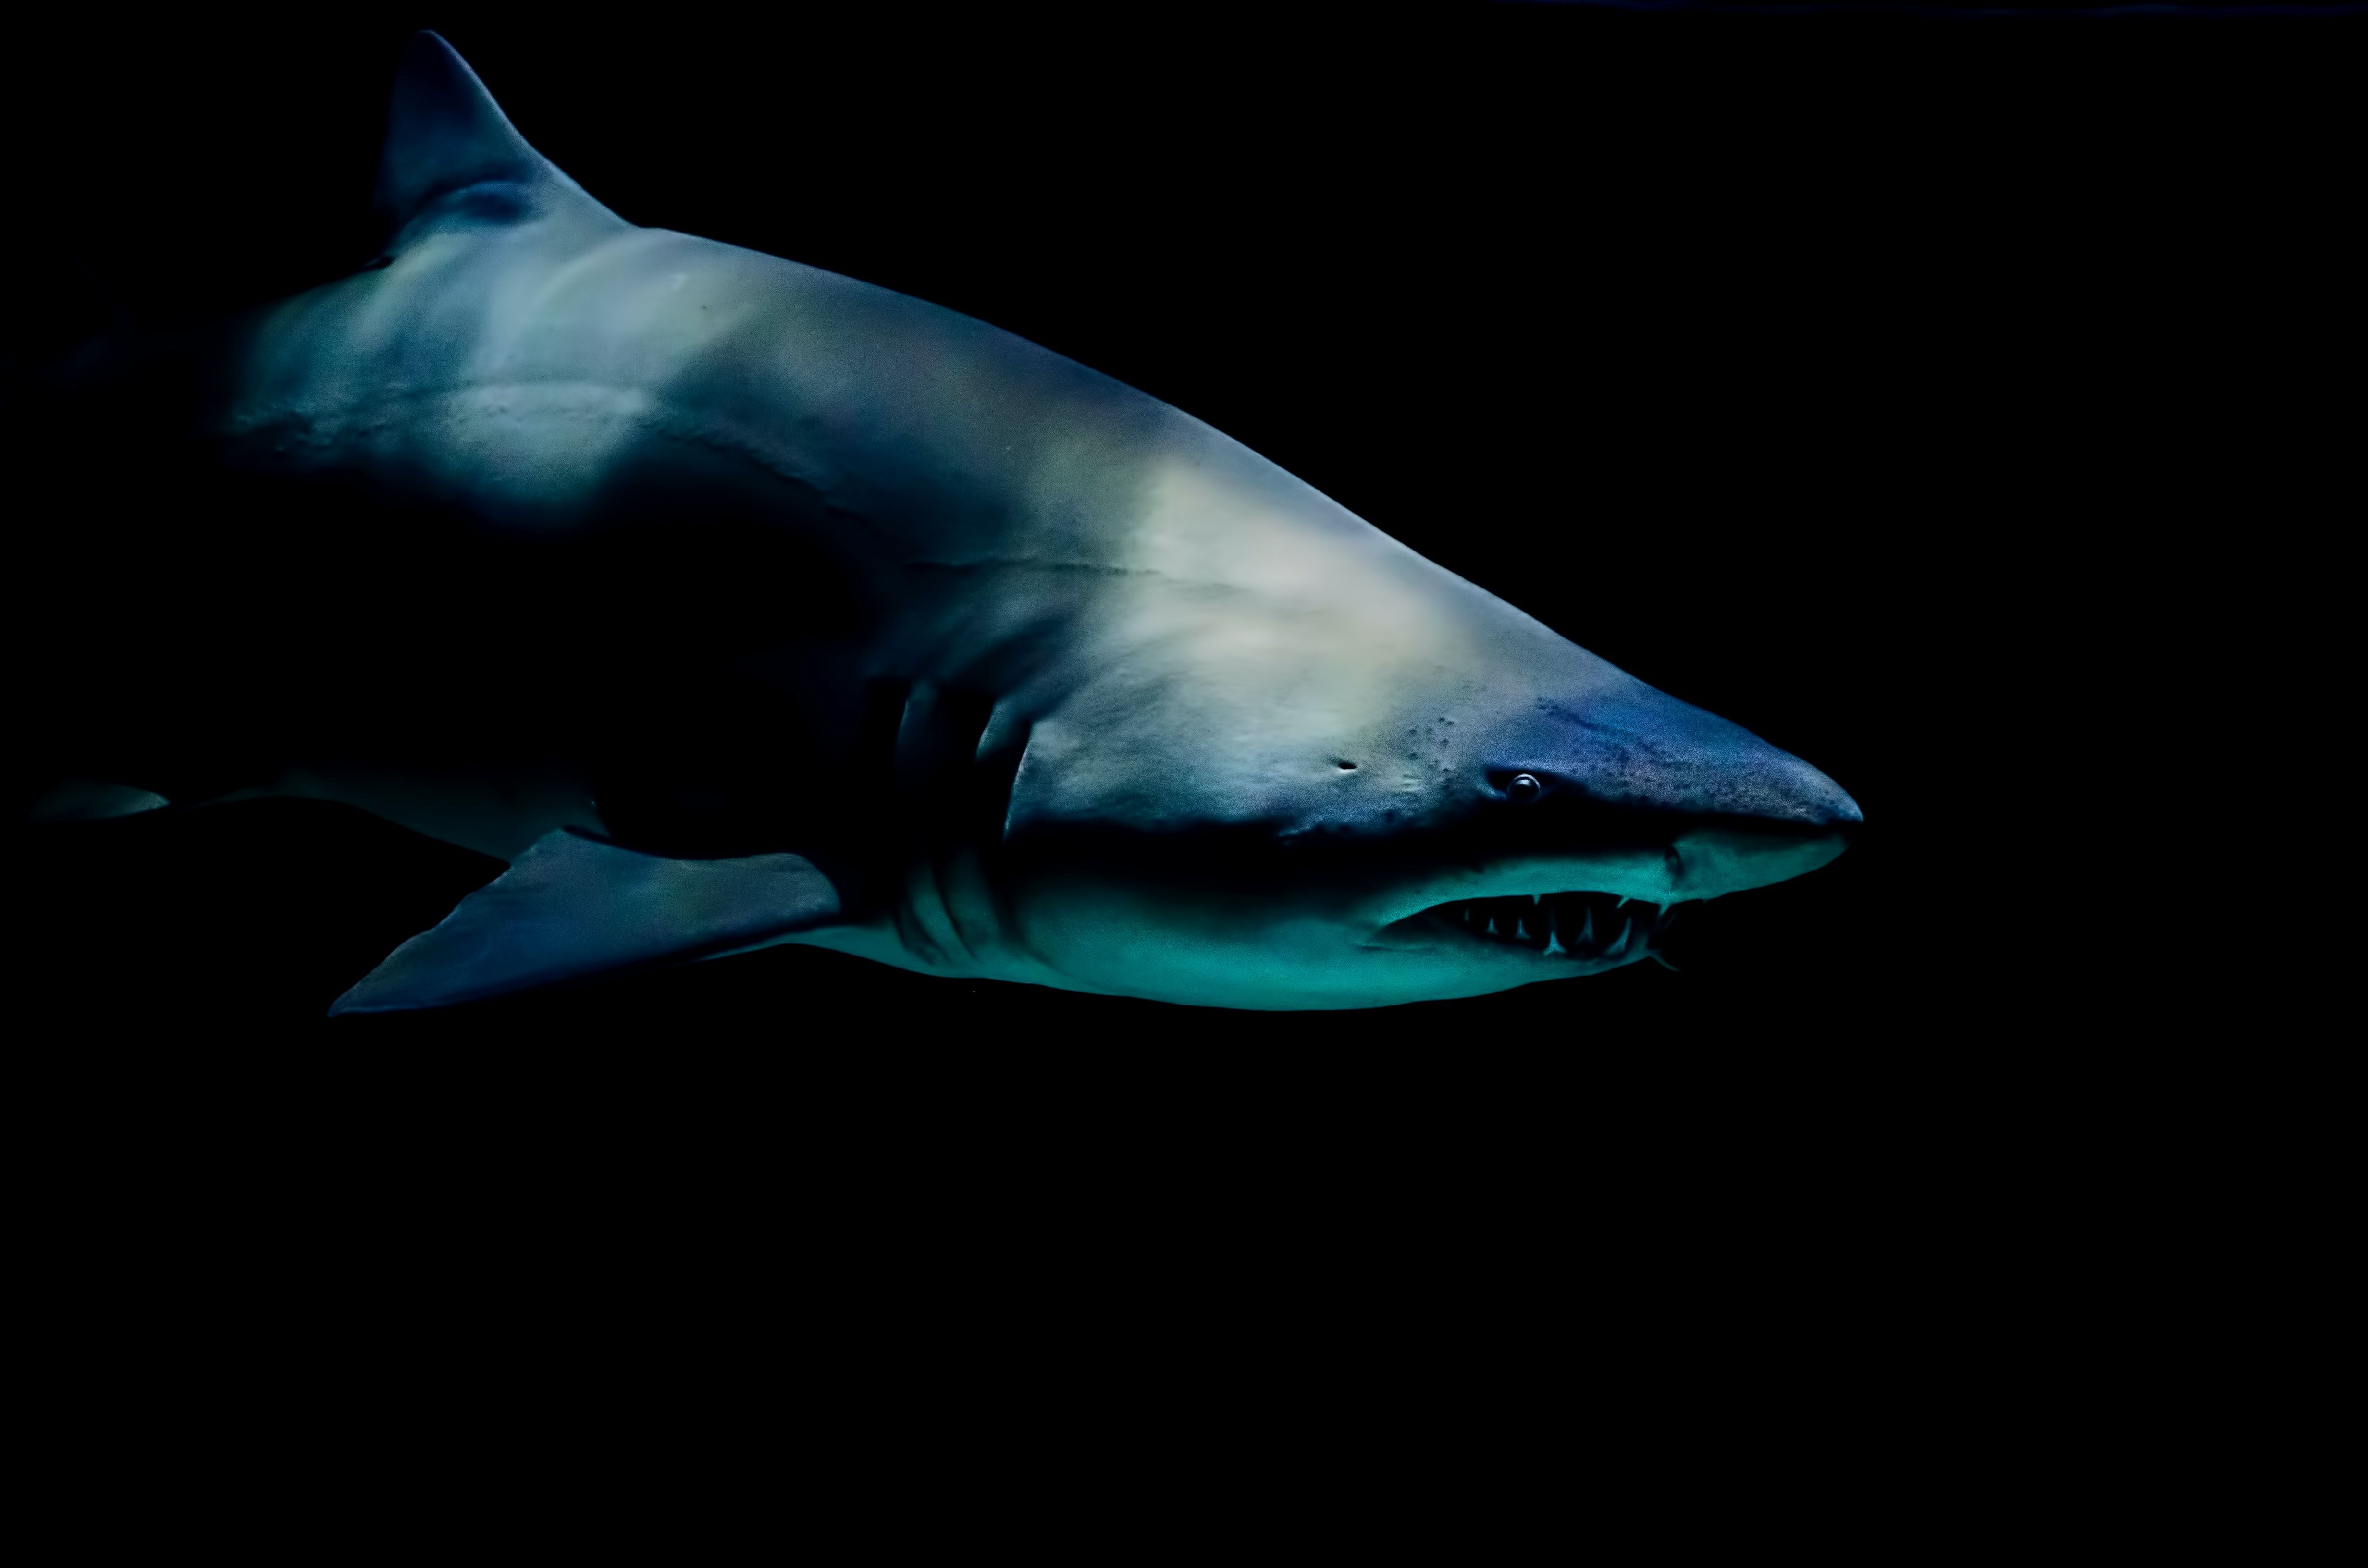 A photo of a Silky Shark against a black background